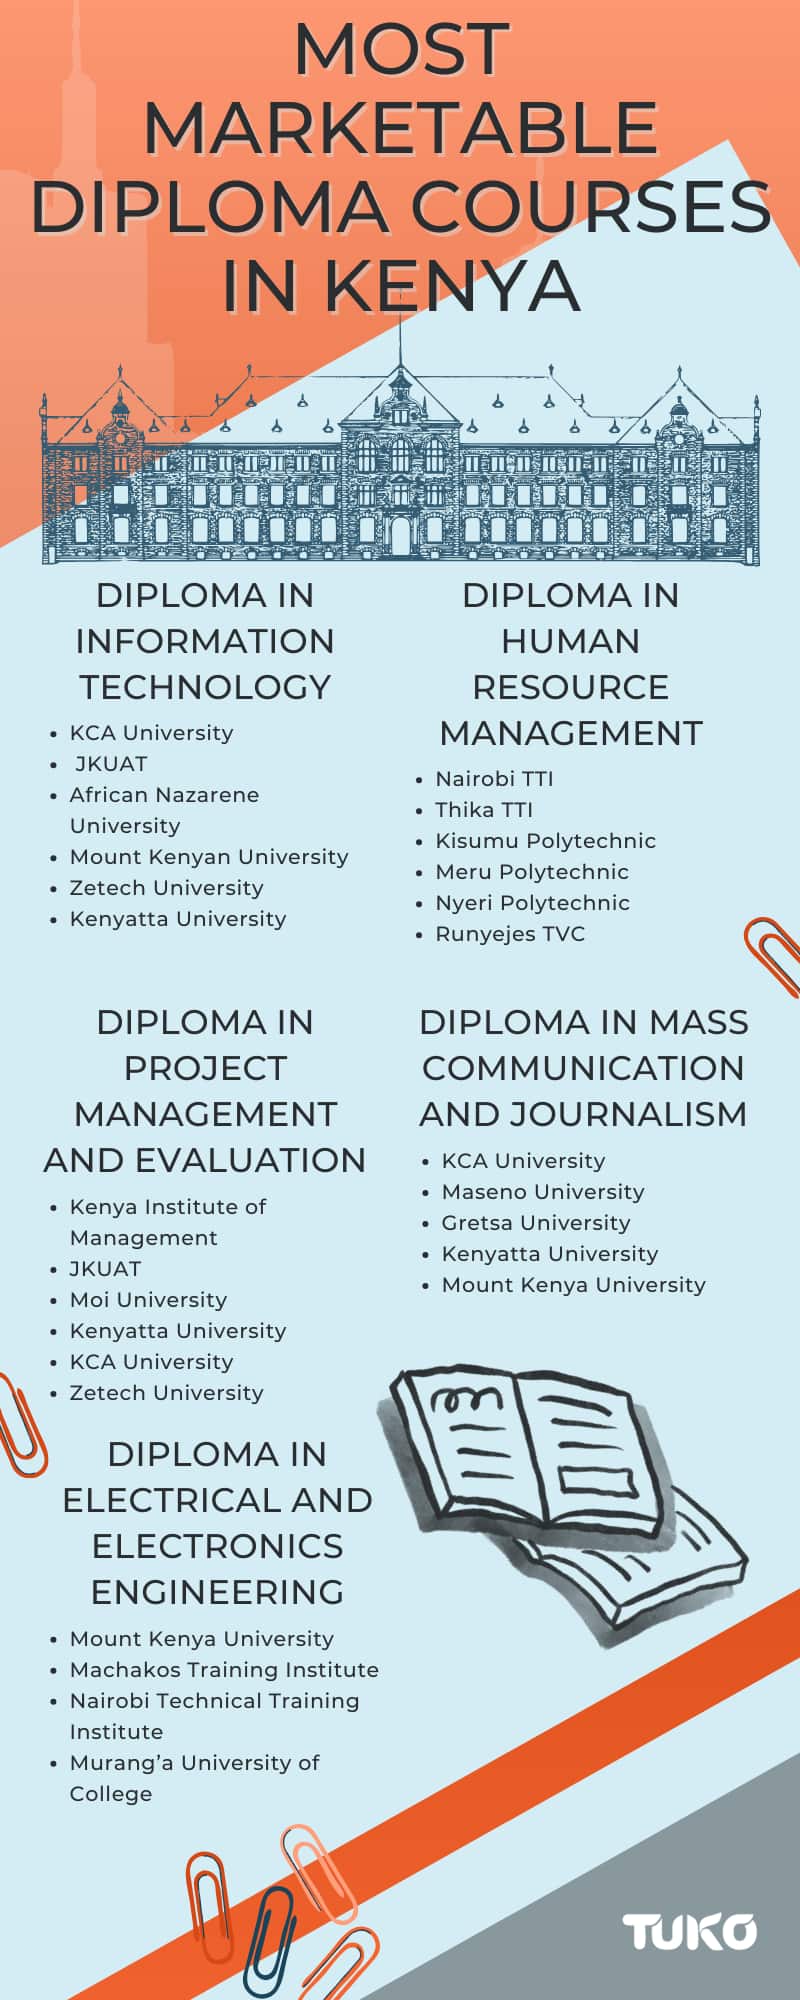 Most marketable diploma courses to enroll in Kenya